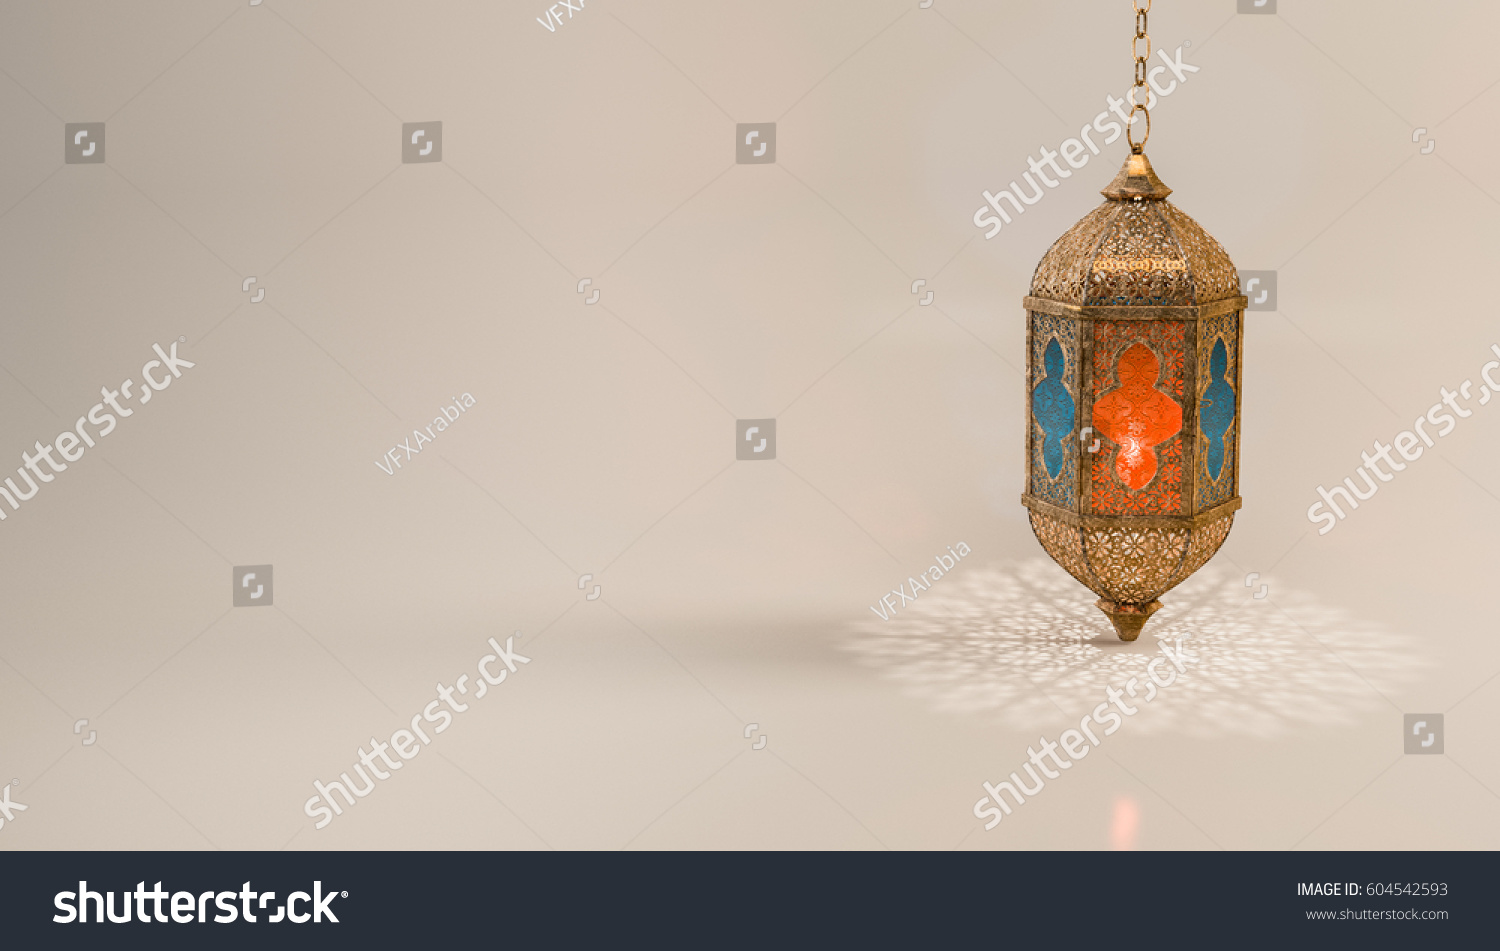 You simply wont find a more stunning candle lantern than this! Featuring such intricate patterns and cut work like an exotic treasure.
Buy it now and start using this quality photo in your design. #604542593